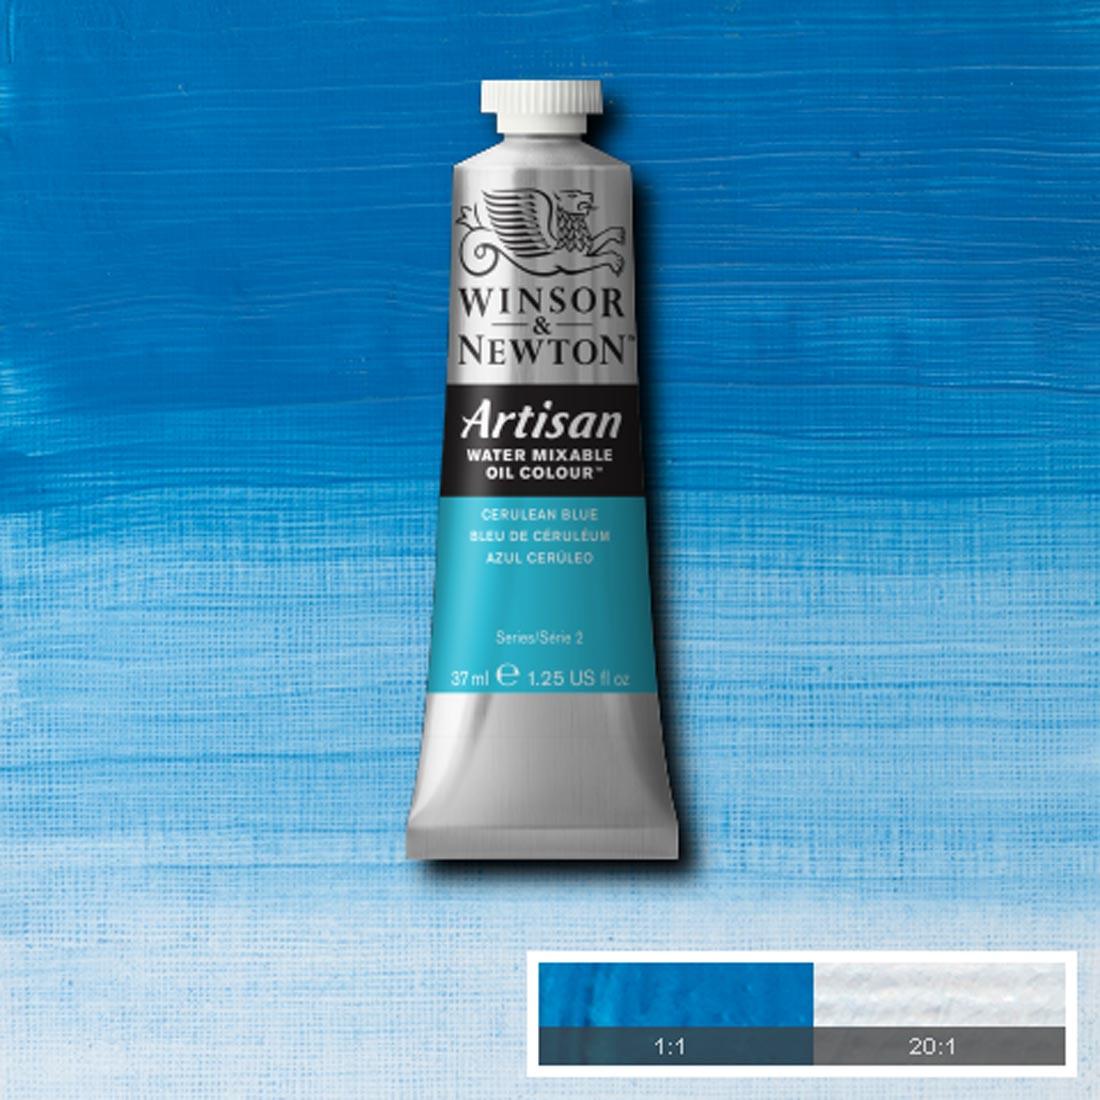 Tube of Cerulean Blue Winsor & Newton Artisan Water Mixable Oil Colour with a paint swatch for the background